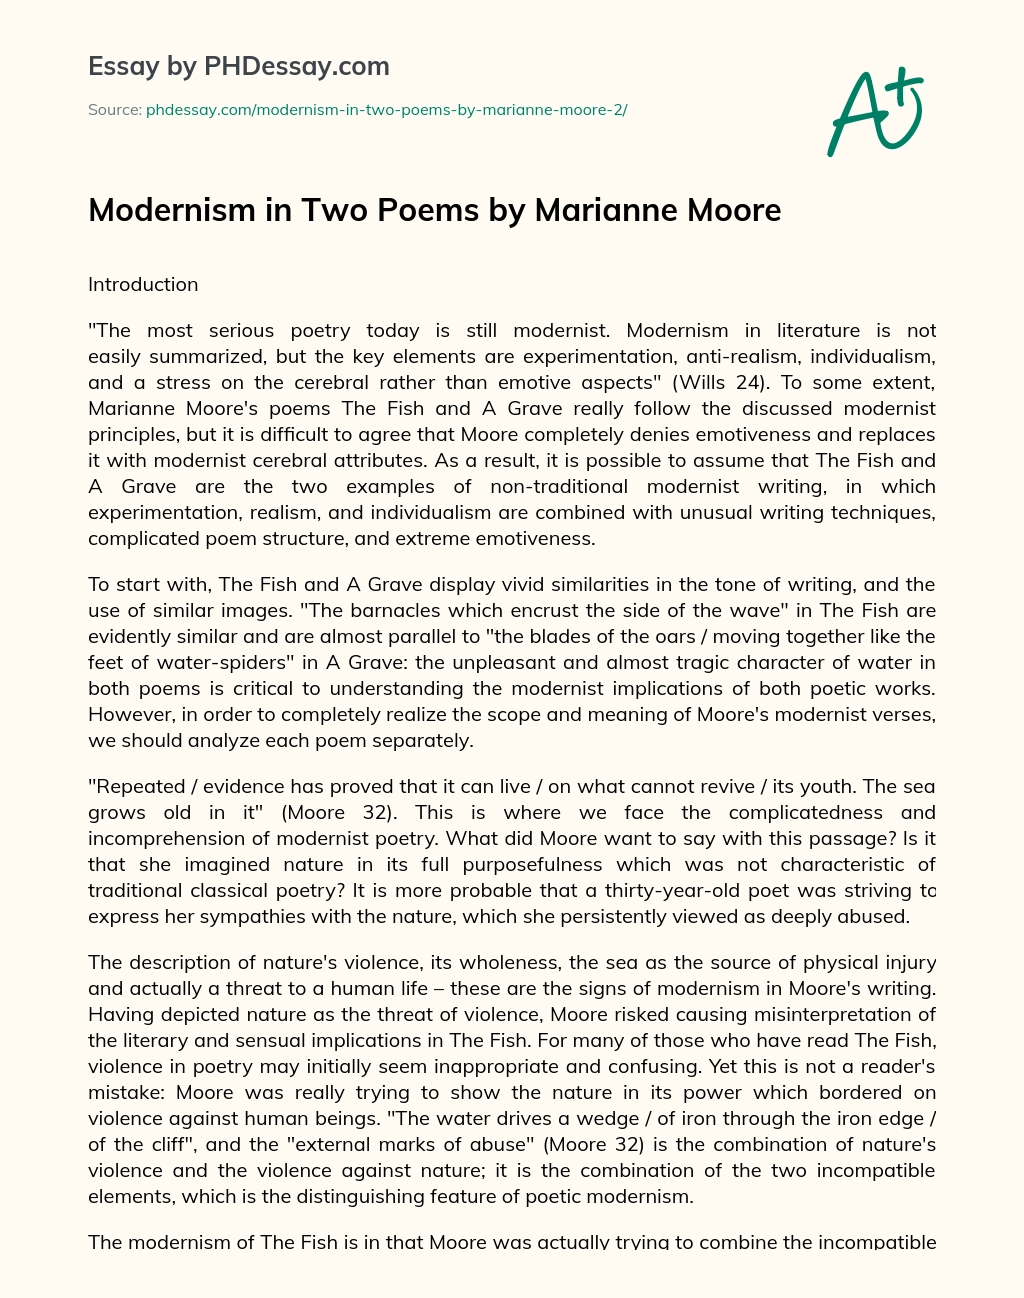 Modernism in Two Poems by Marianne Moore essay